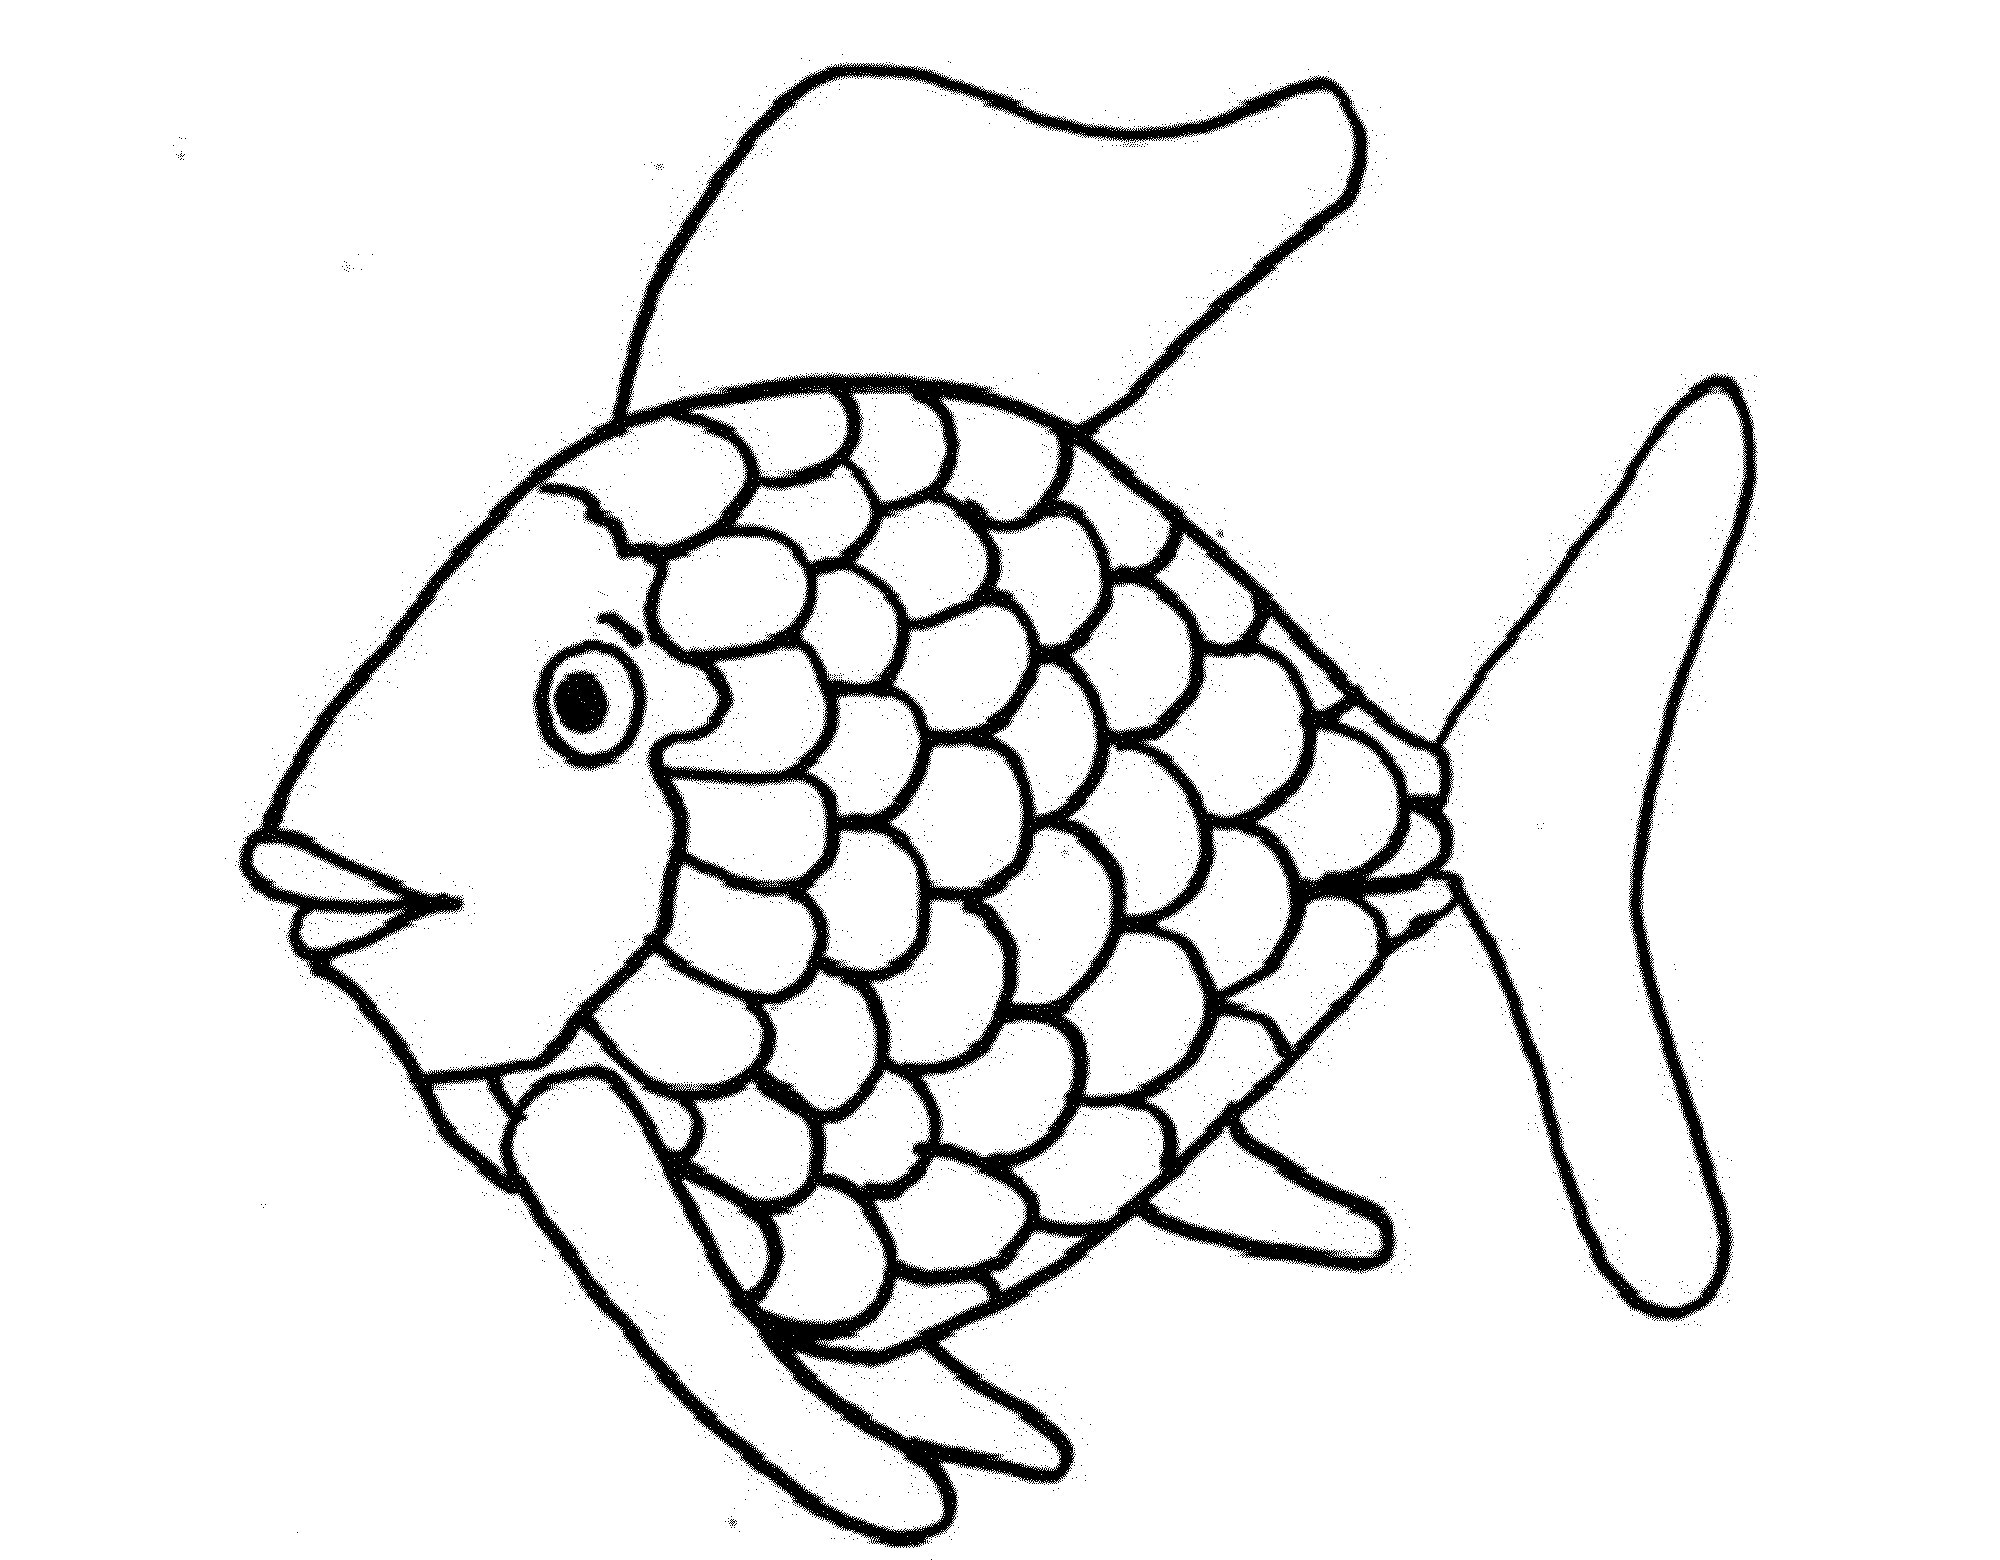 Rainbow Fish Coloring Pages Preschoolers Coloring Pages Inspiring Rainbow Fish Coloring Preschool To Fancy